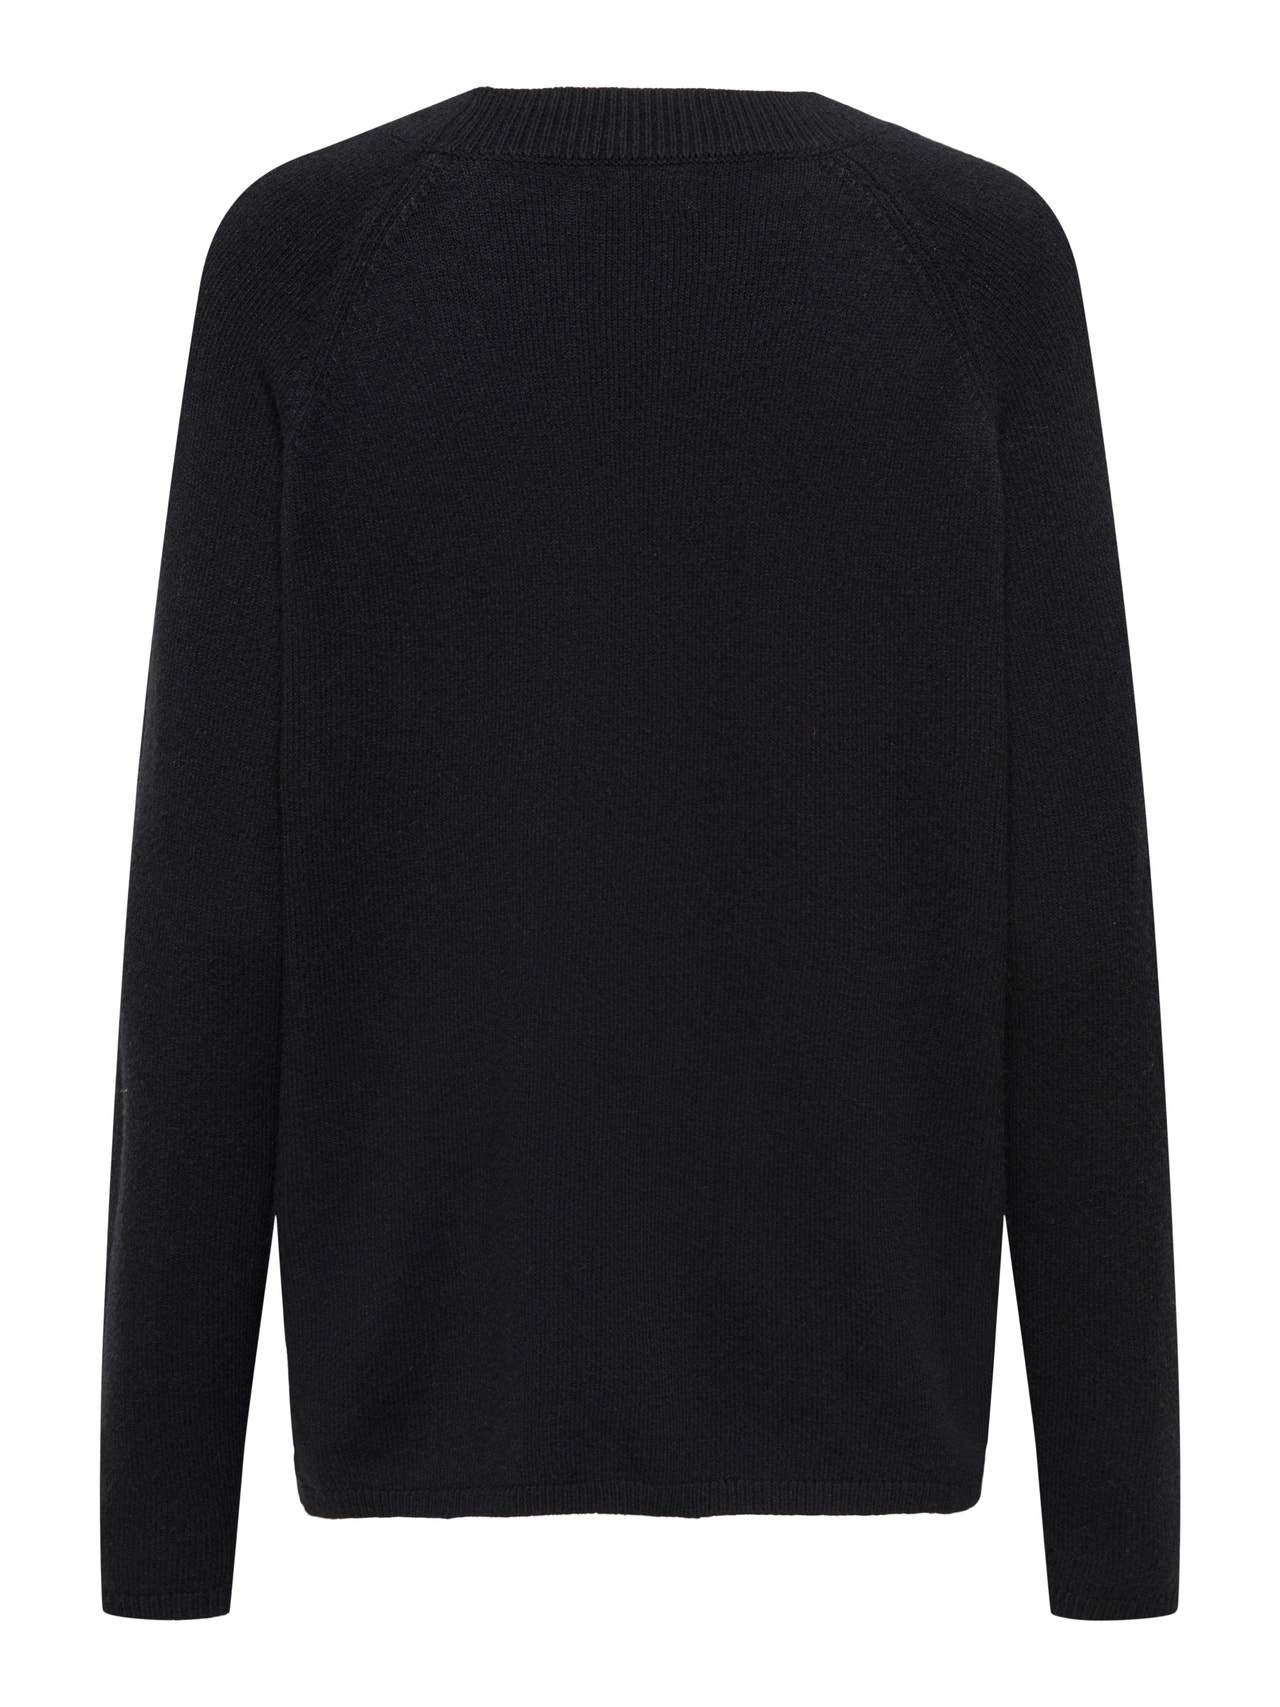 ONLY Knit Fit Rundhals Pullover -Black - 15292897